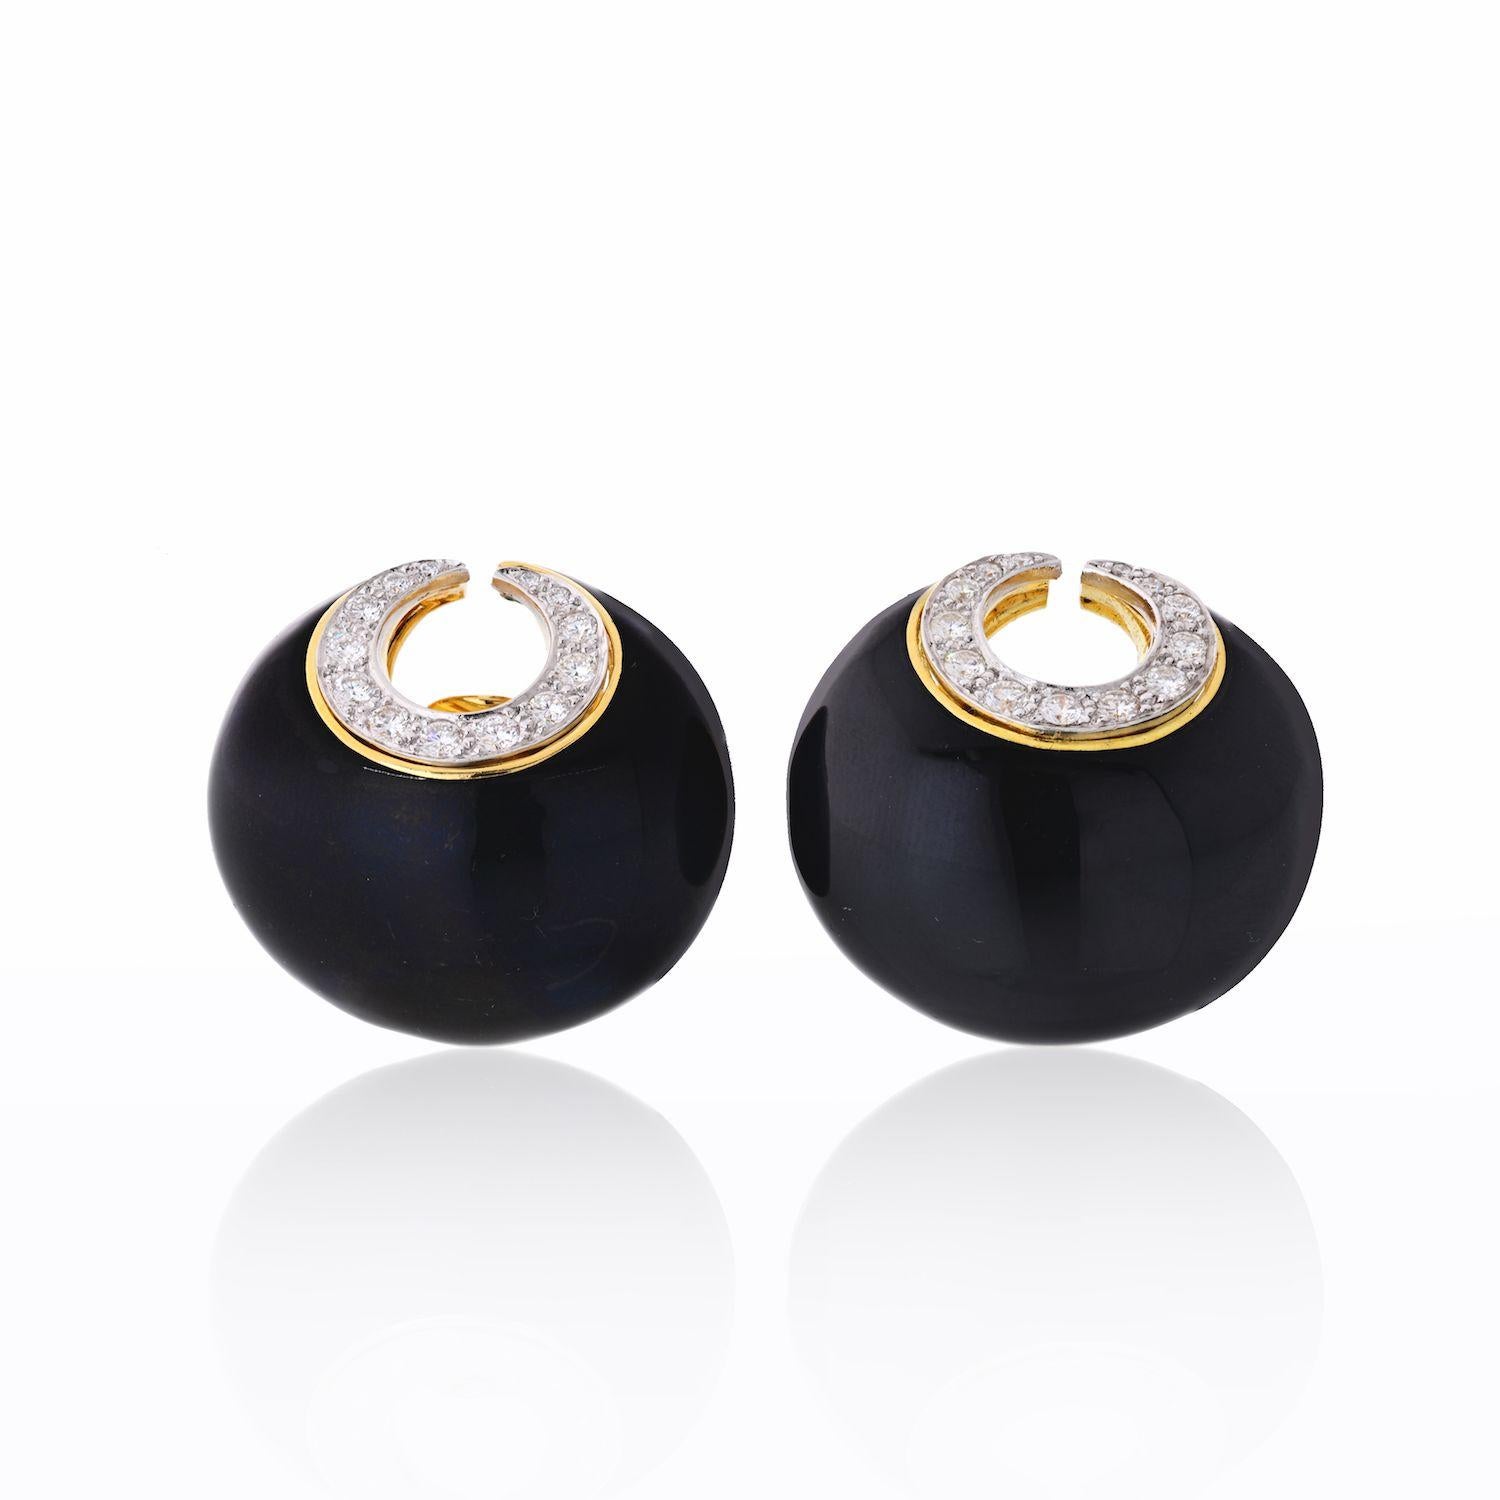 David Webb black enamel and diamond crescent ear-clips. Make a statement in these oversized bombe clip-earrings. Slick black enamel and a touch of diamonds adds enough glam and make a huge impact. 
These earrings are in perfect condition and show no